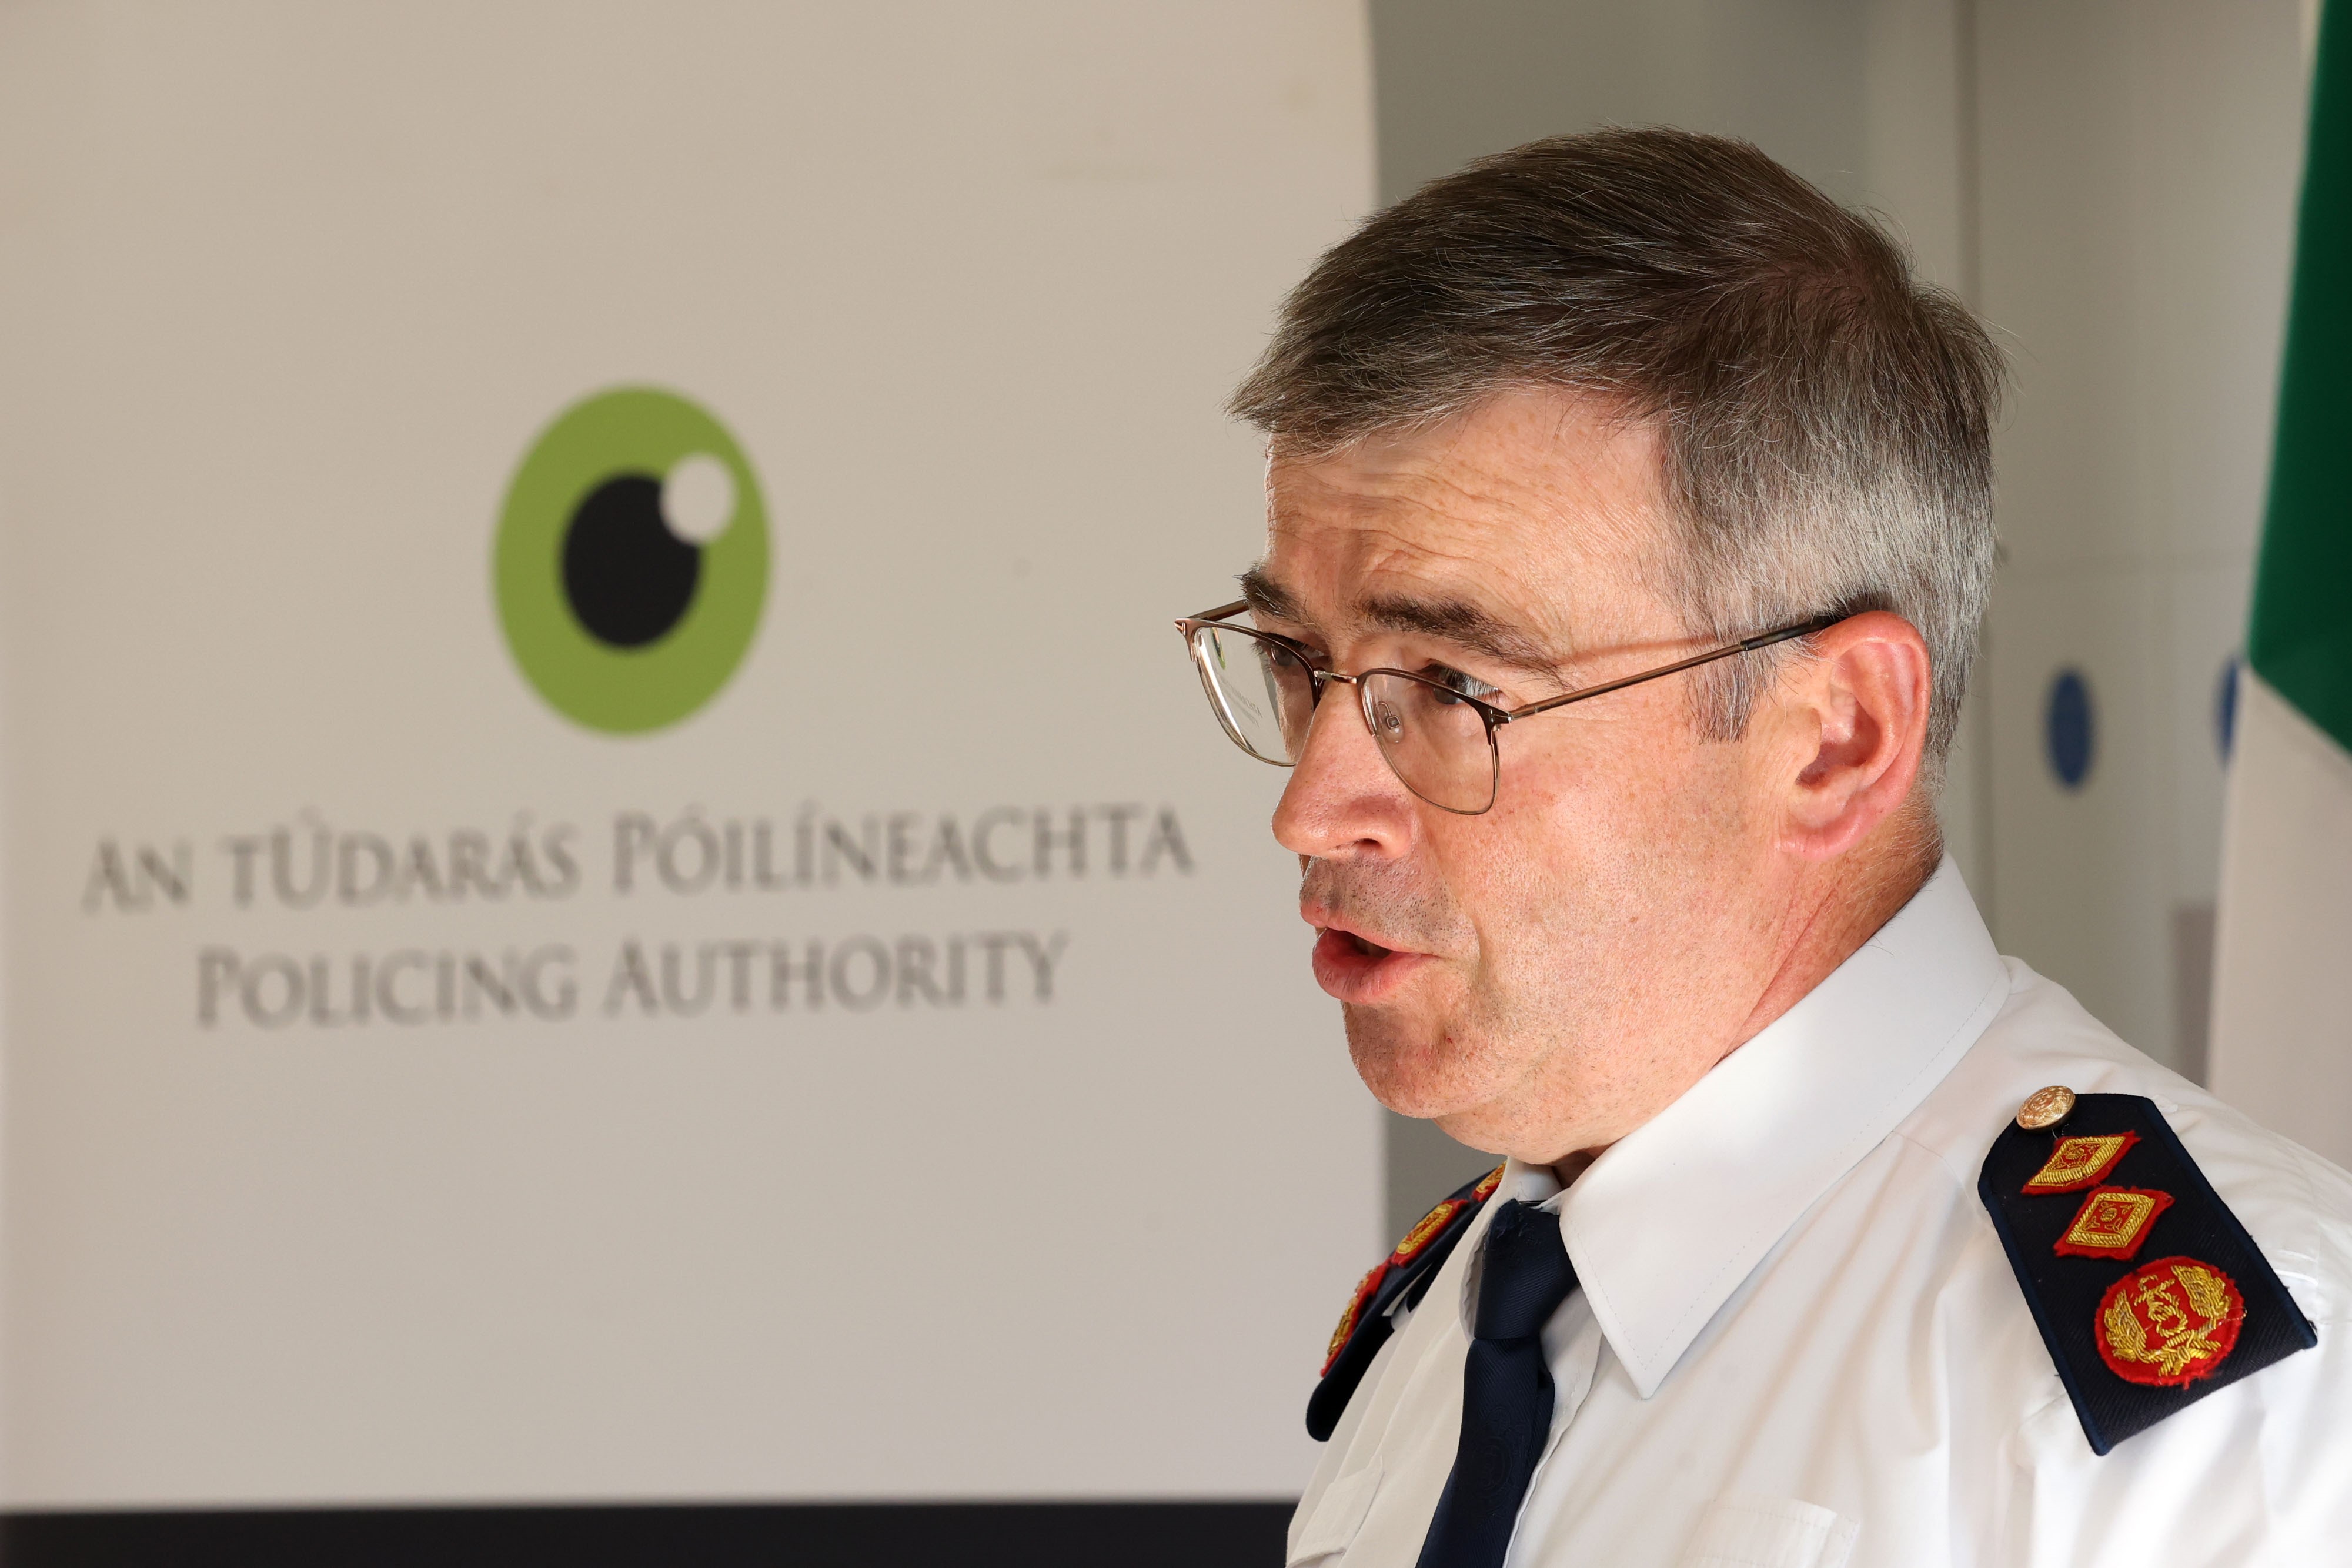 Policing Authority Meeting June 2022